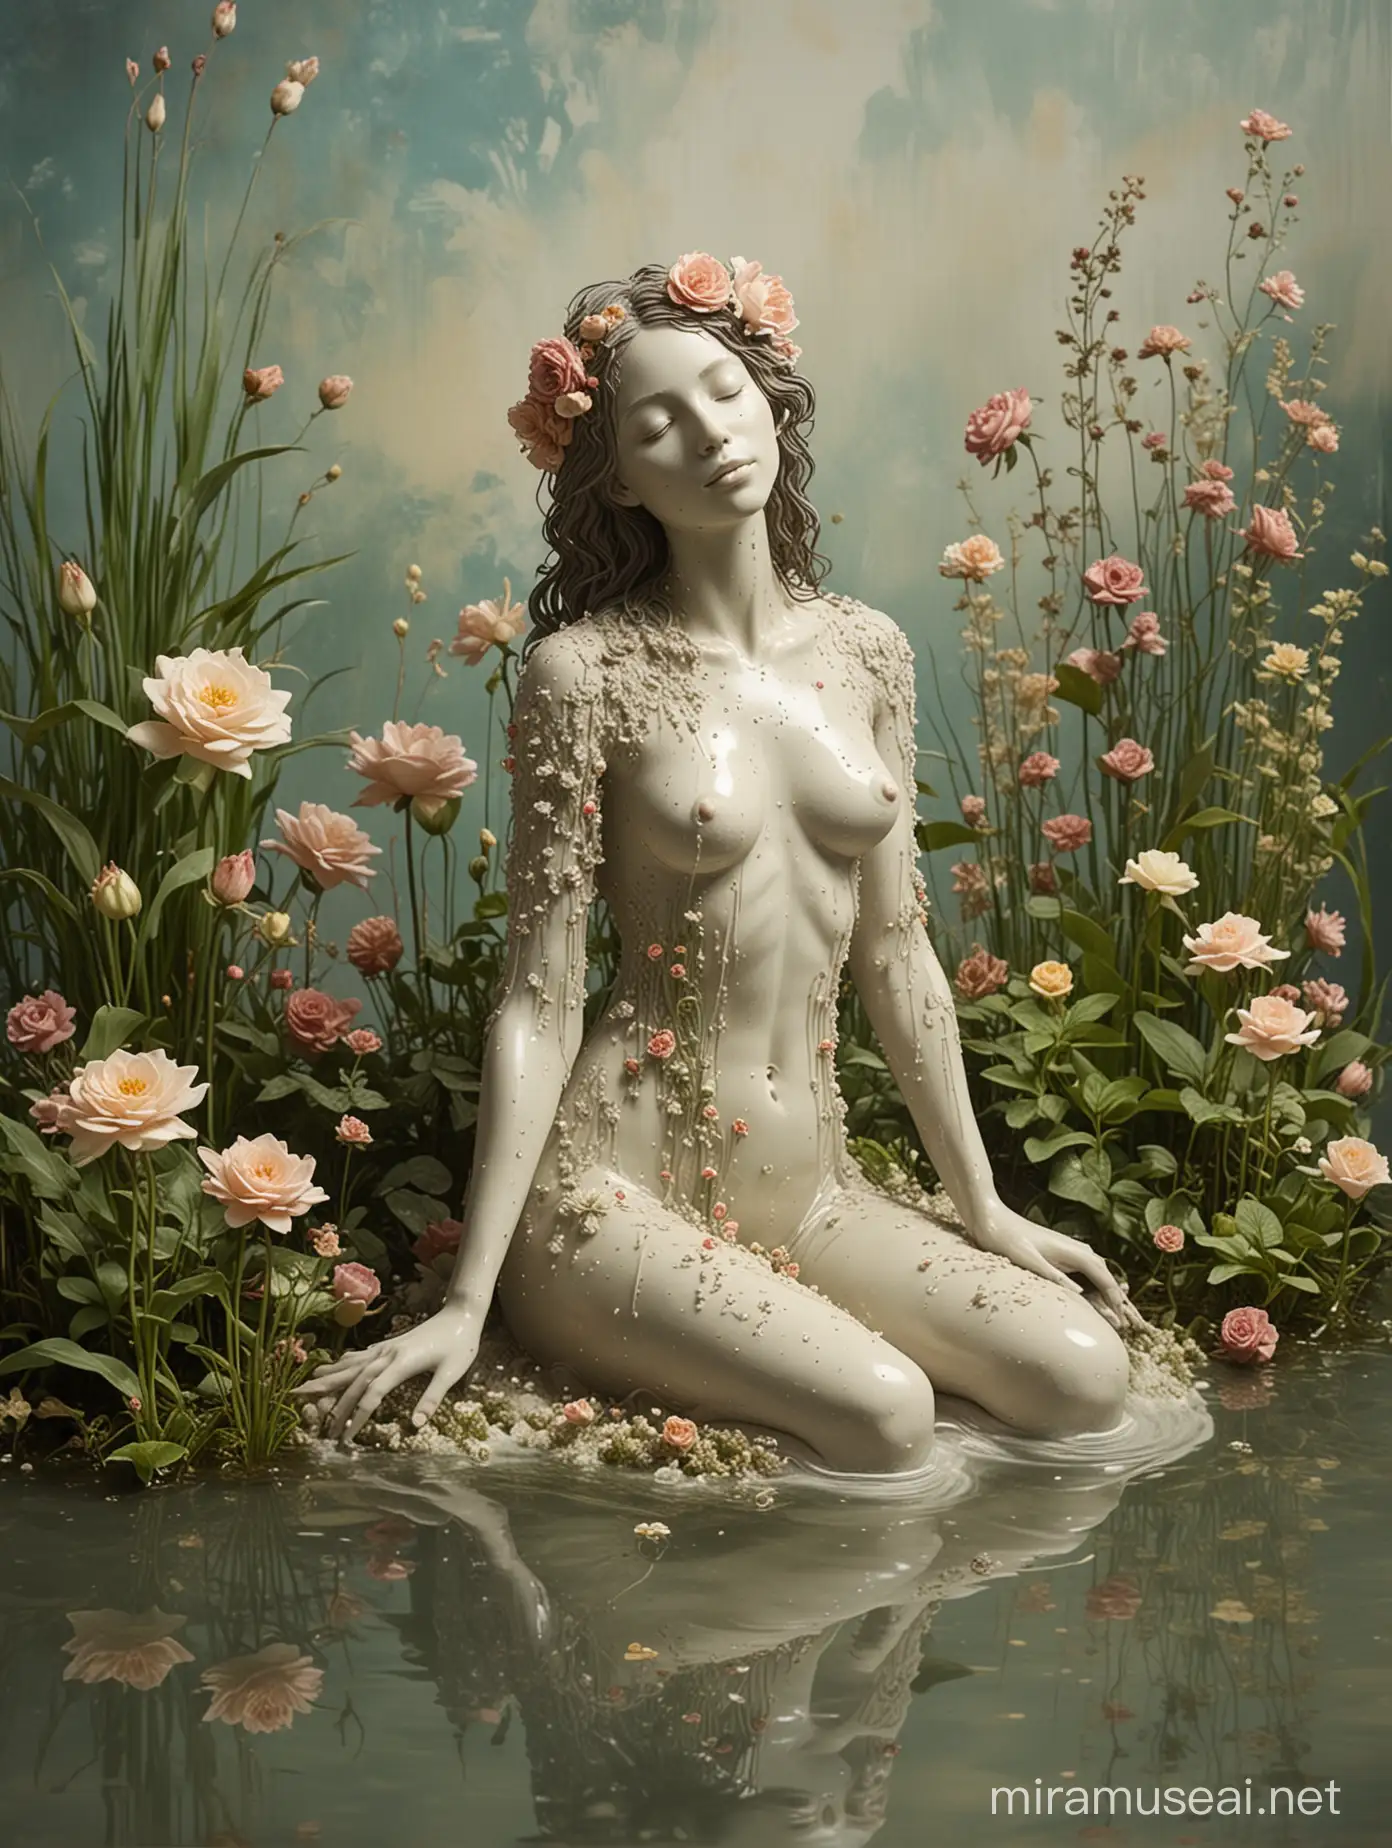 SCULPTURE of a human woman, sitting in the water, with aquatic plants and flowers, with light colored background and small shapes, watering her plants, with hairy roses, large fur flowers, melted liquid abstract background, haute couture, vintage photography, cinematographic , soft skin, NO NIPPLE